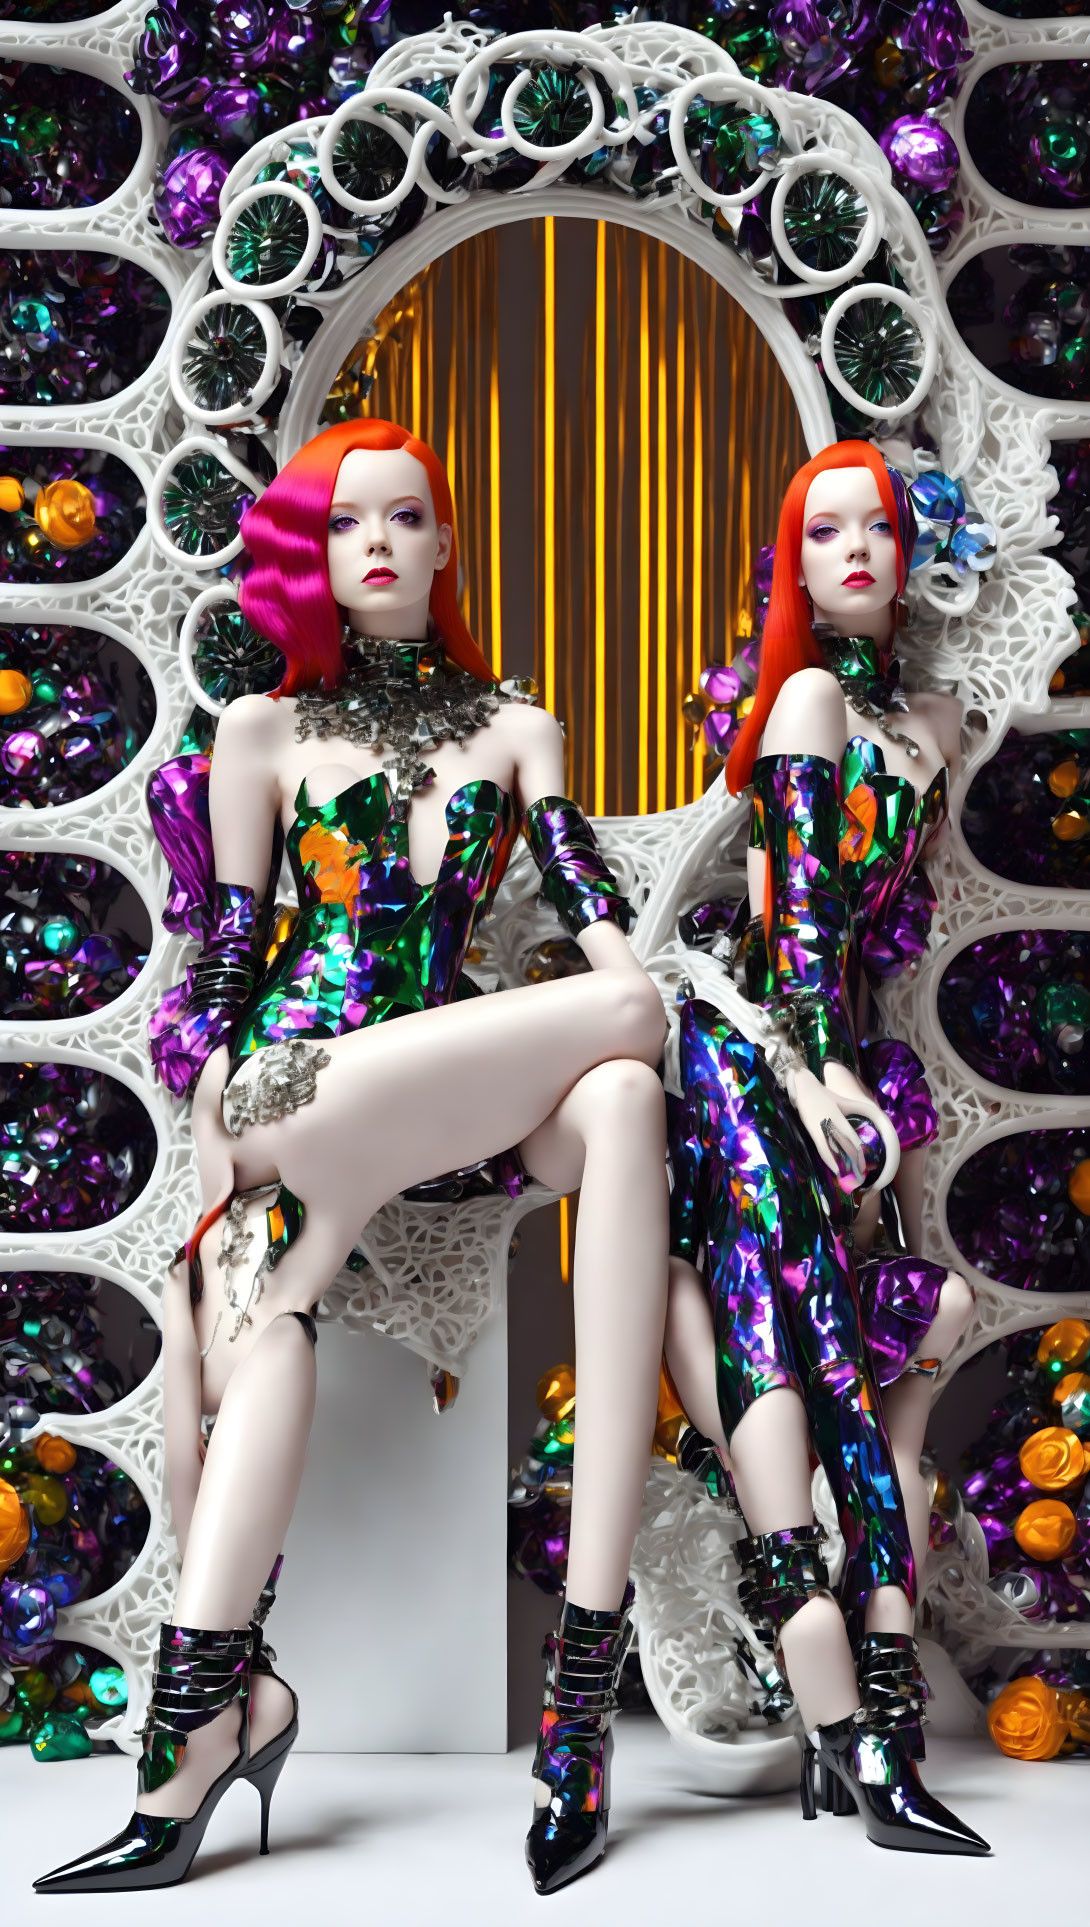 Mannequins with Pink and Red Hair in Colorful Outfits by Oval Mirror